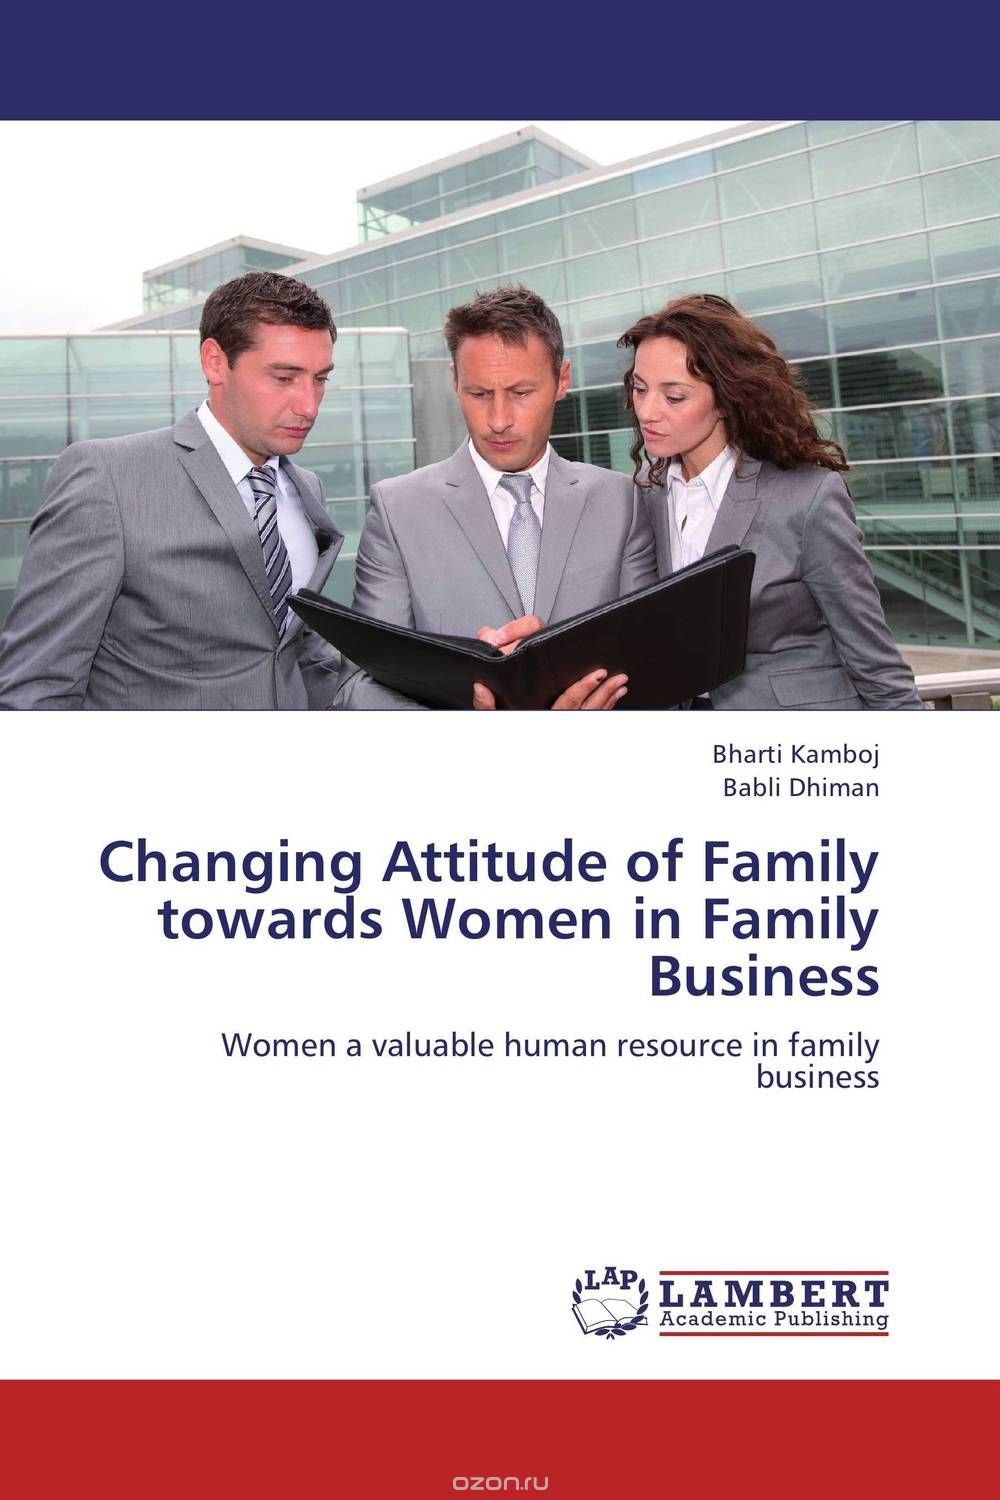 Changing Attitude of Family towards Women in Family Business